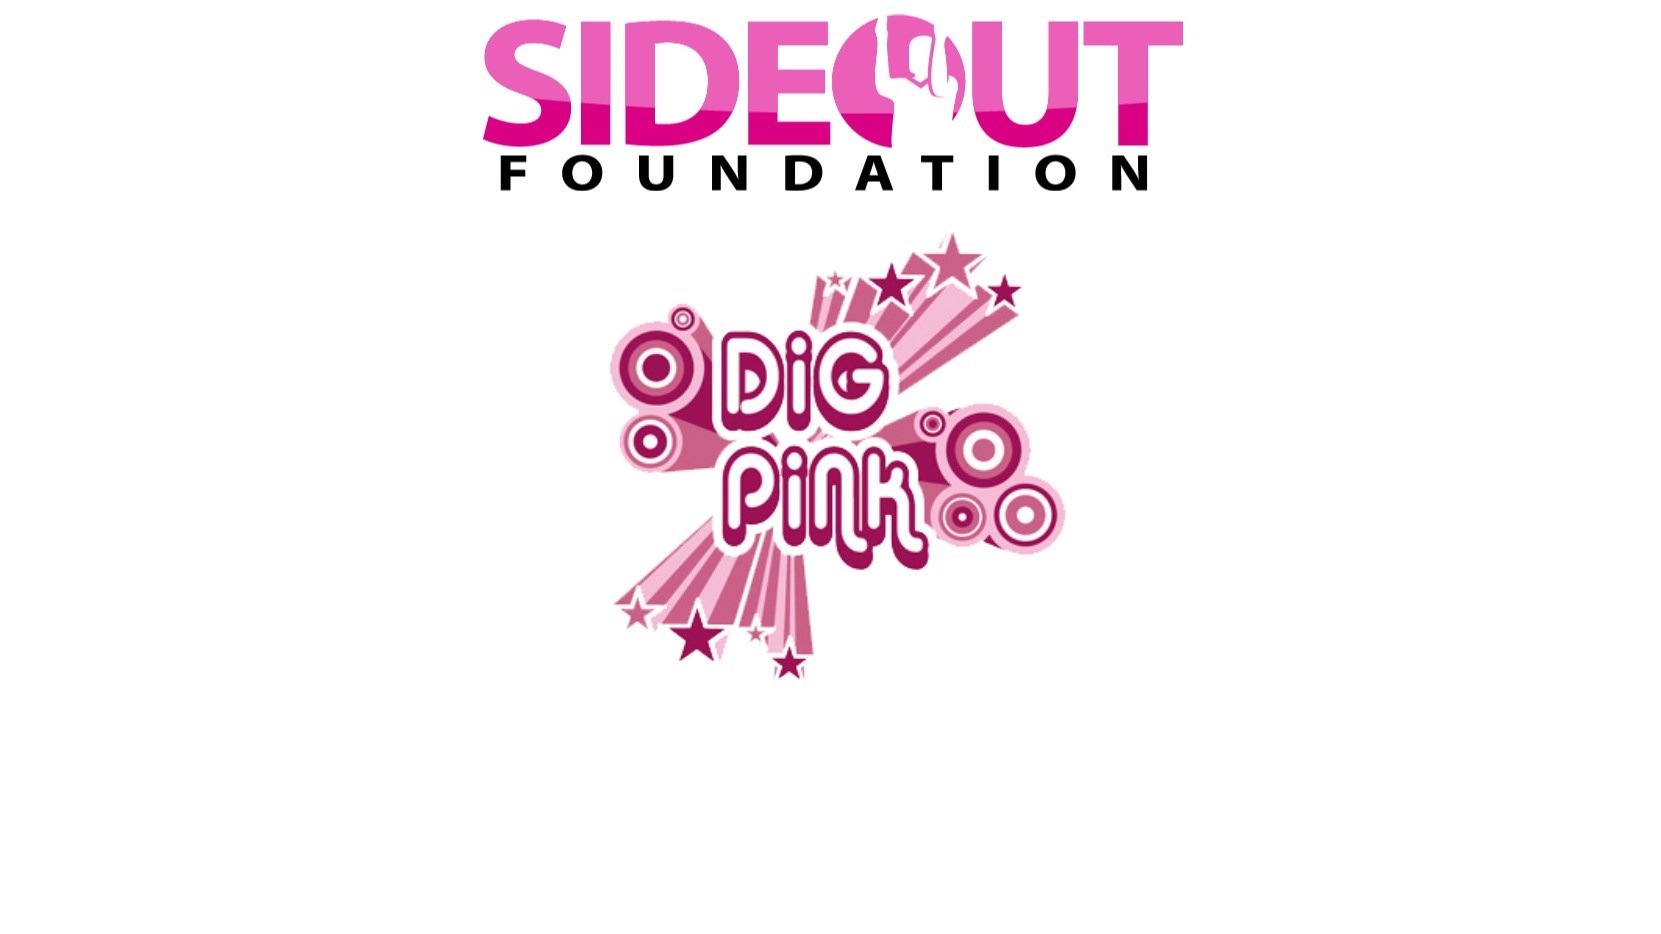 The women's volleyball team raised $1,537 as part of the Sideout Foundation's Dig Pink event.